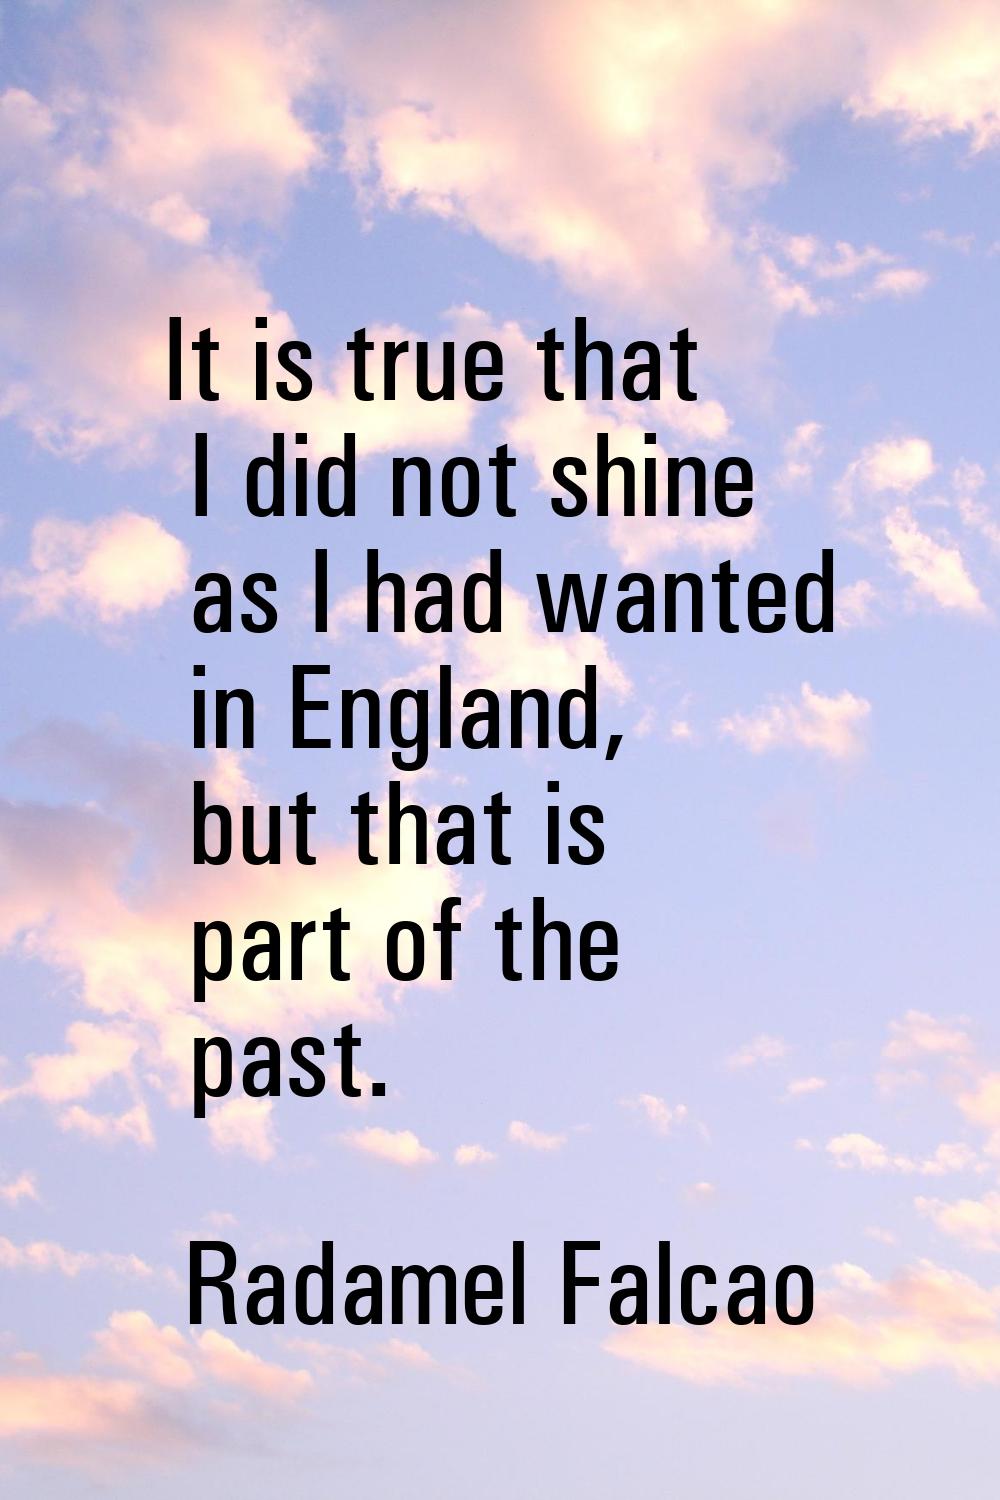 It is true that I did not shine as I had wanted in England, but that is part of the past.